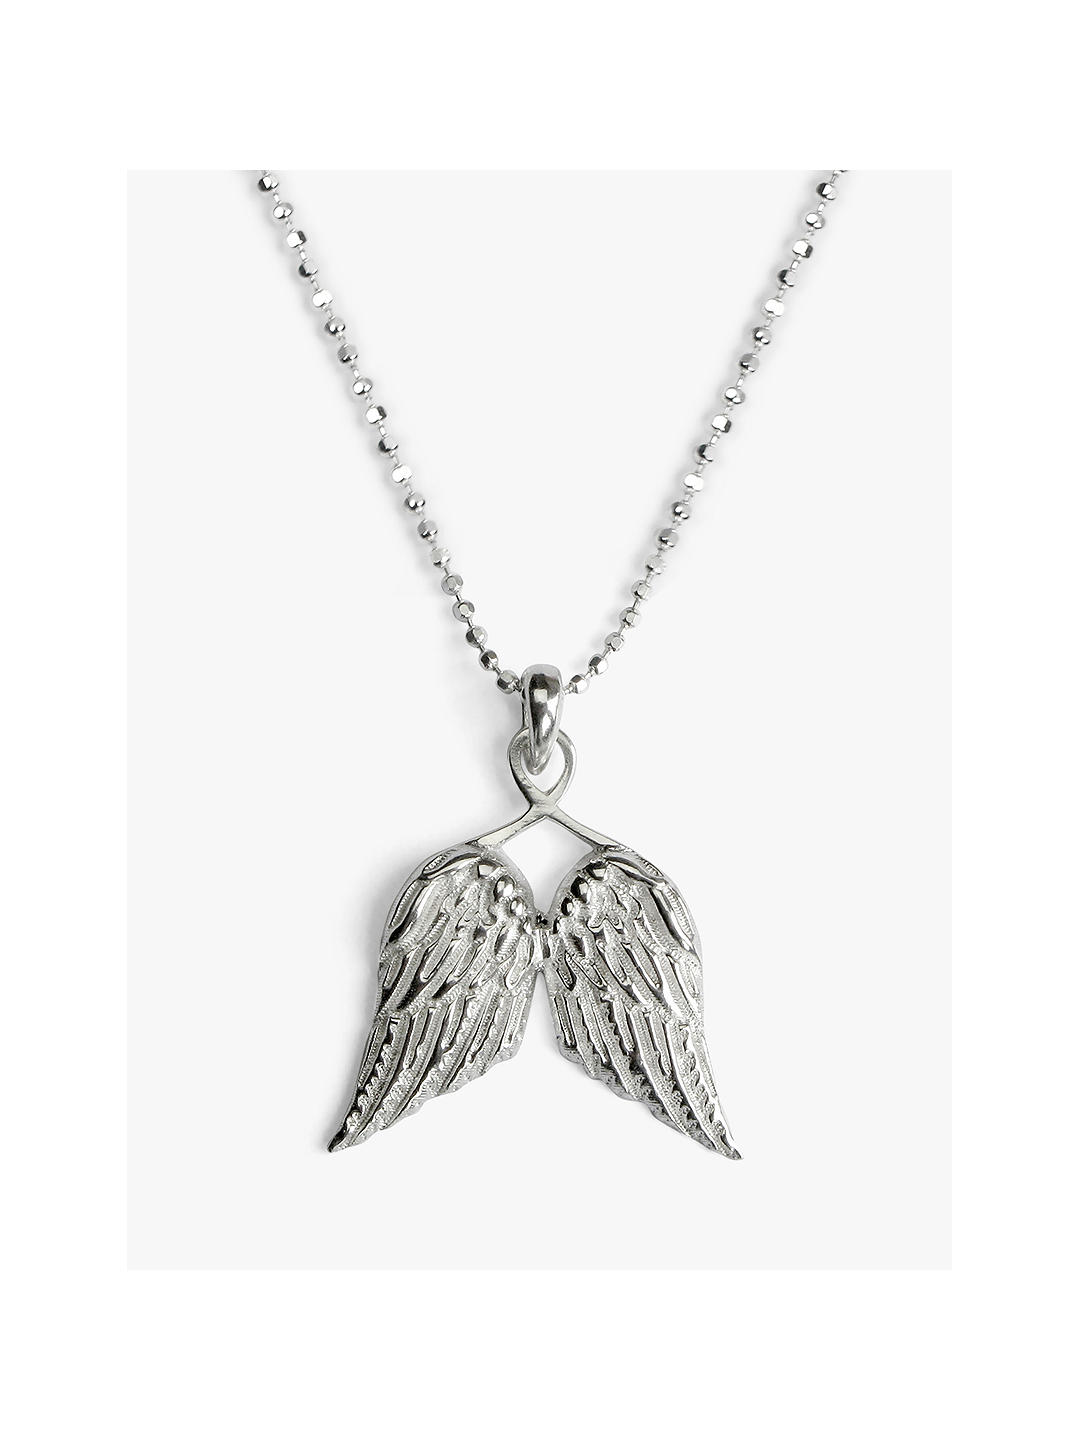 Tales From The Earth Child's Little Guardian Angel Wings Pendant Necklace, Silver